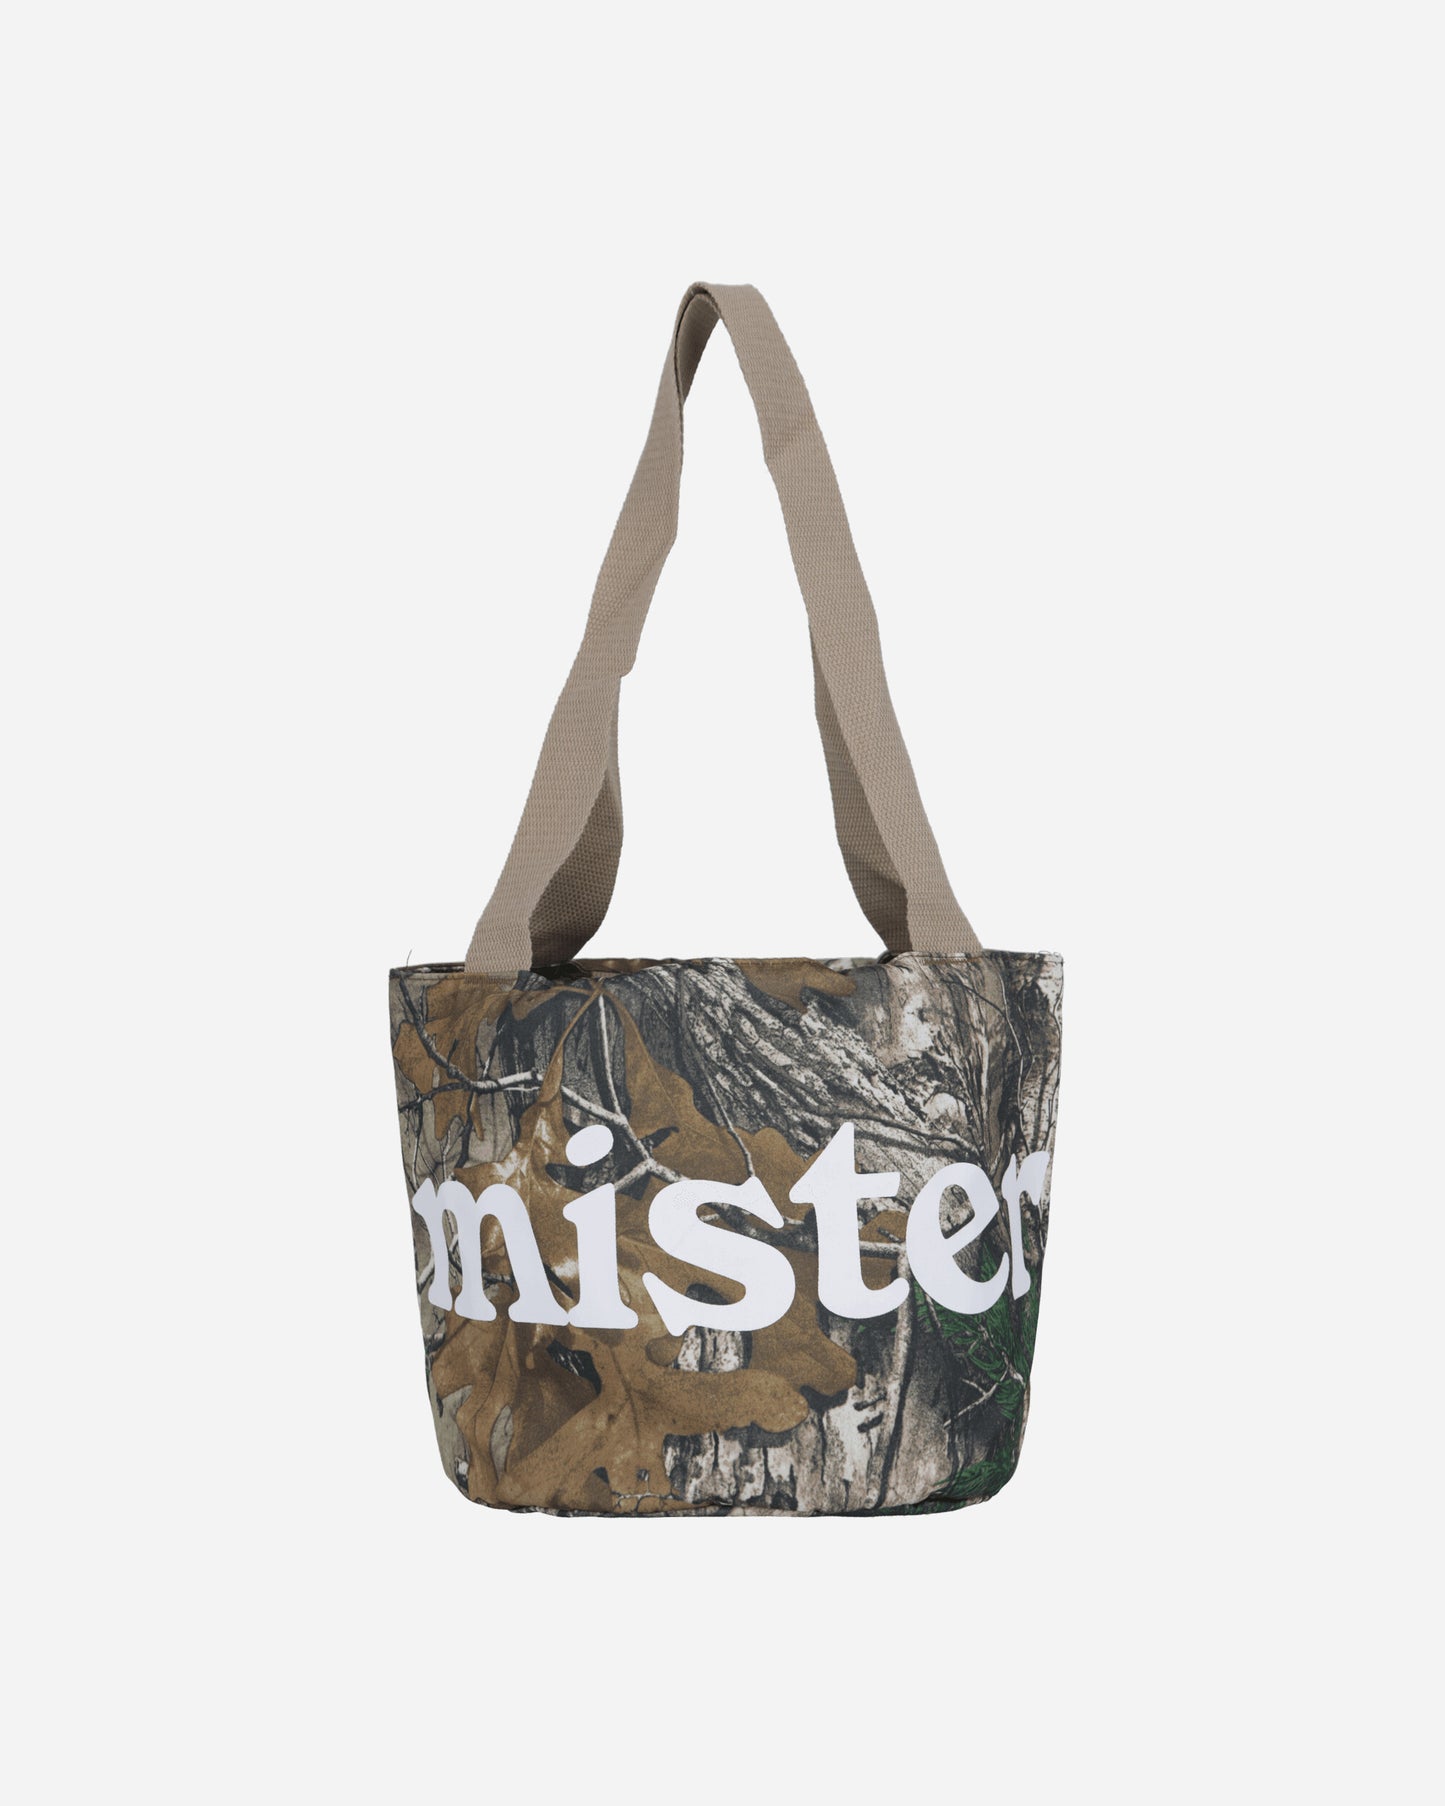 Mister Green Round Tote / Grow Pot - Small Camo Bags and Backpacks Tote Bags MG-F1560 CAM